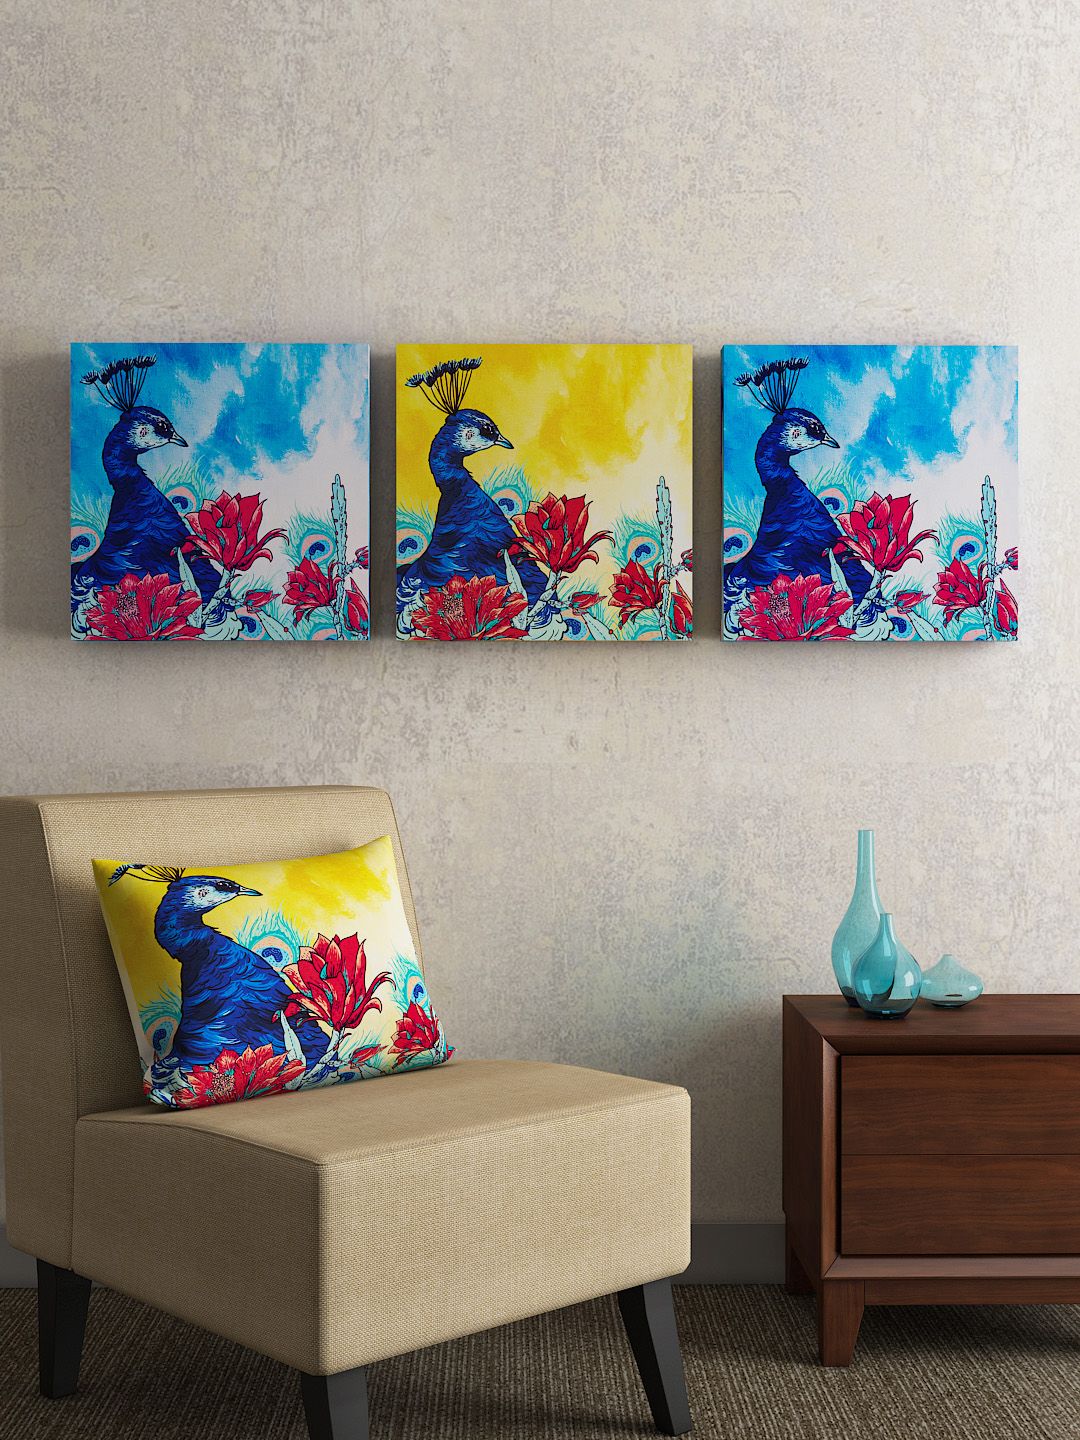 SEJ by Nisha Gupta Set of 3 Multicolored Framed Wall Painting Price in India